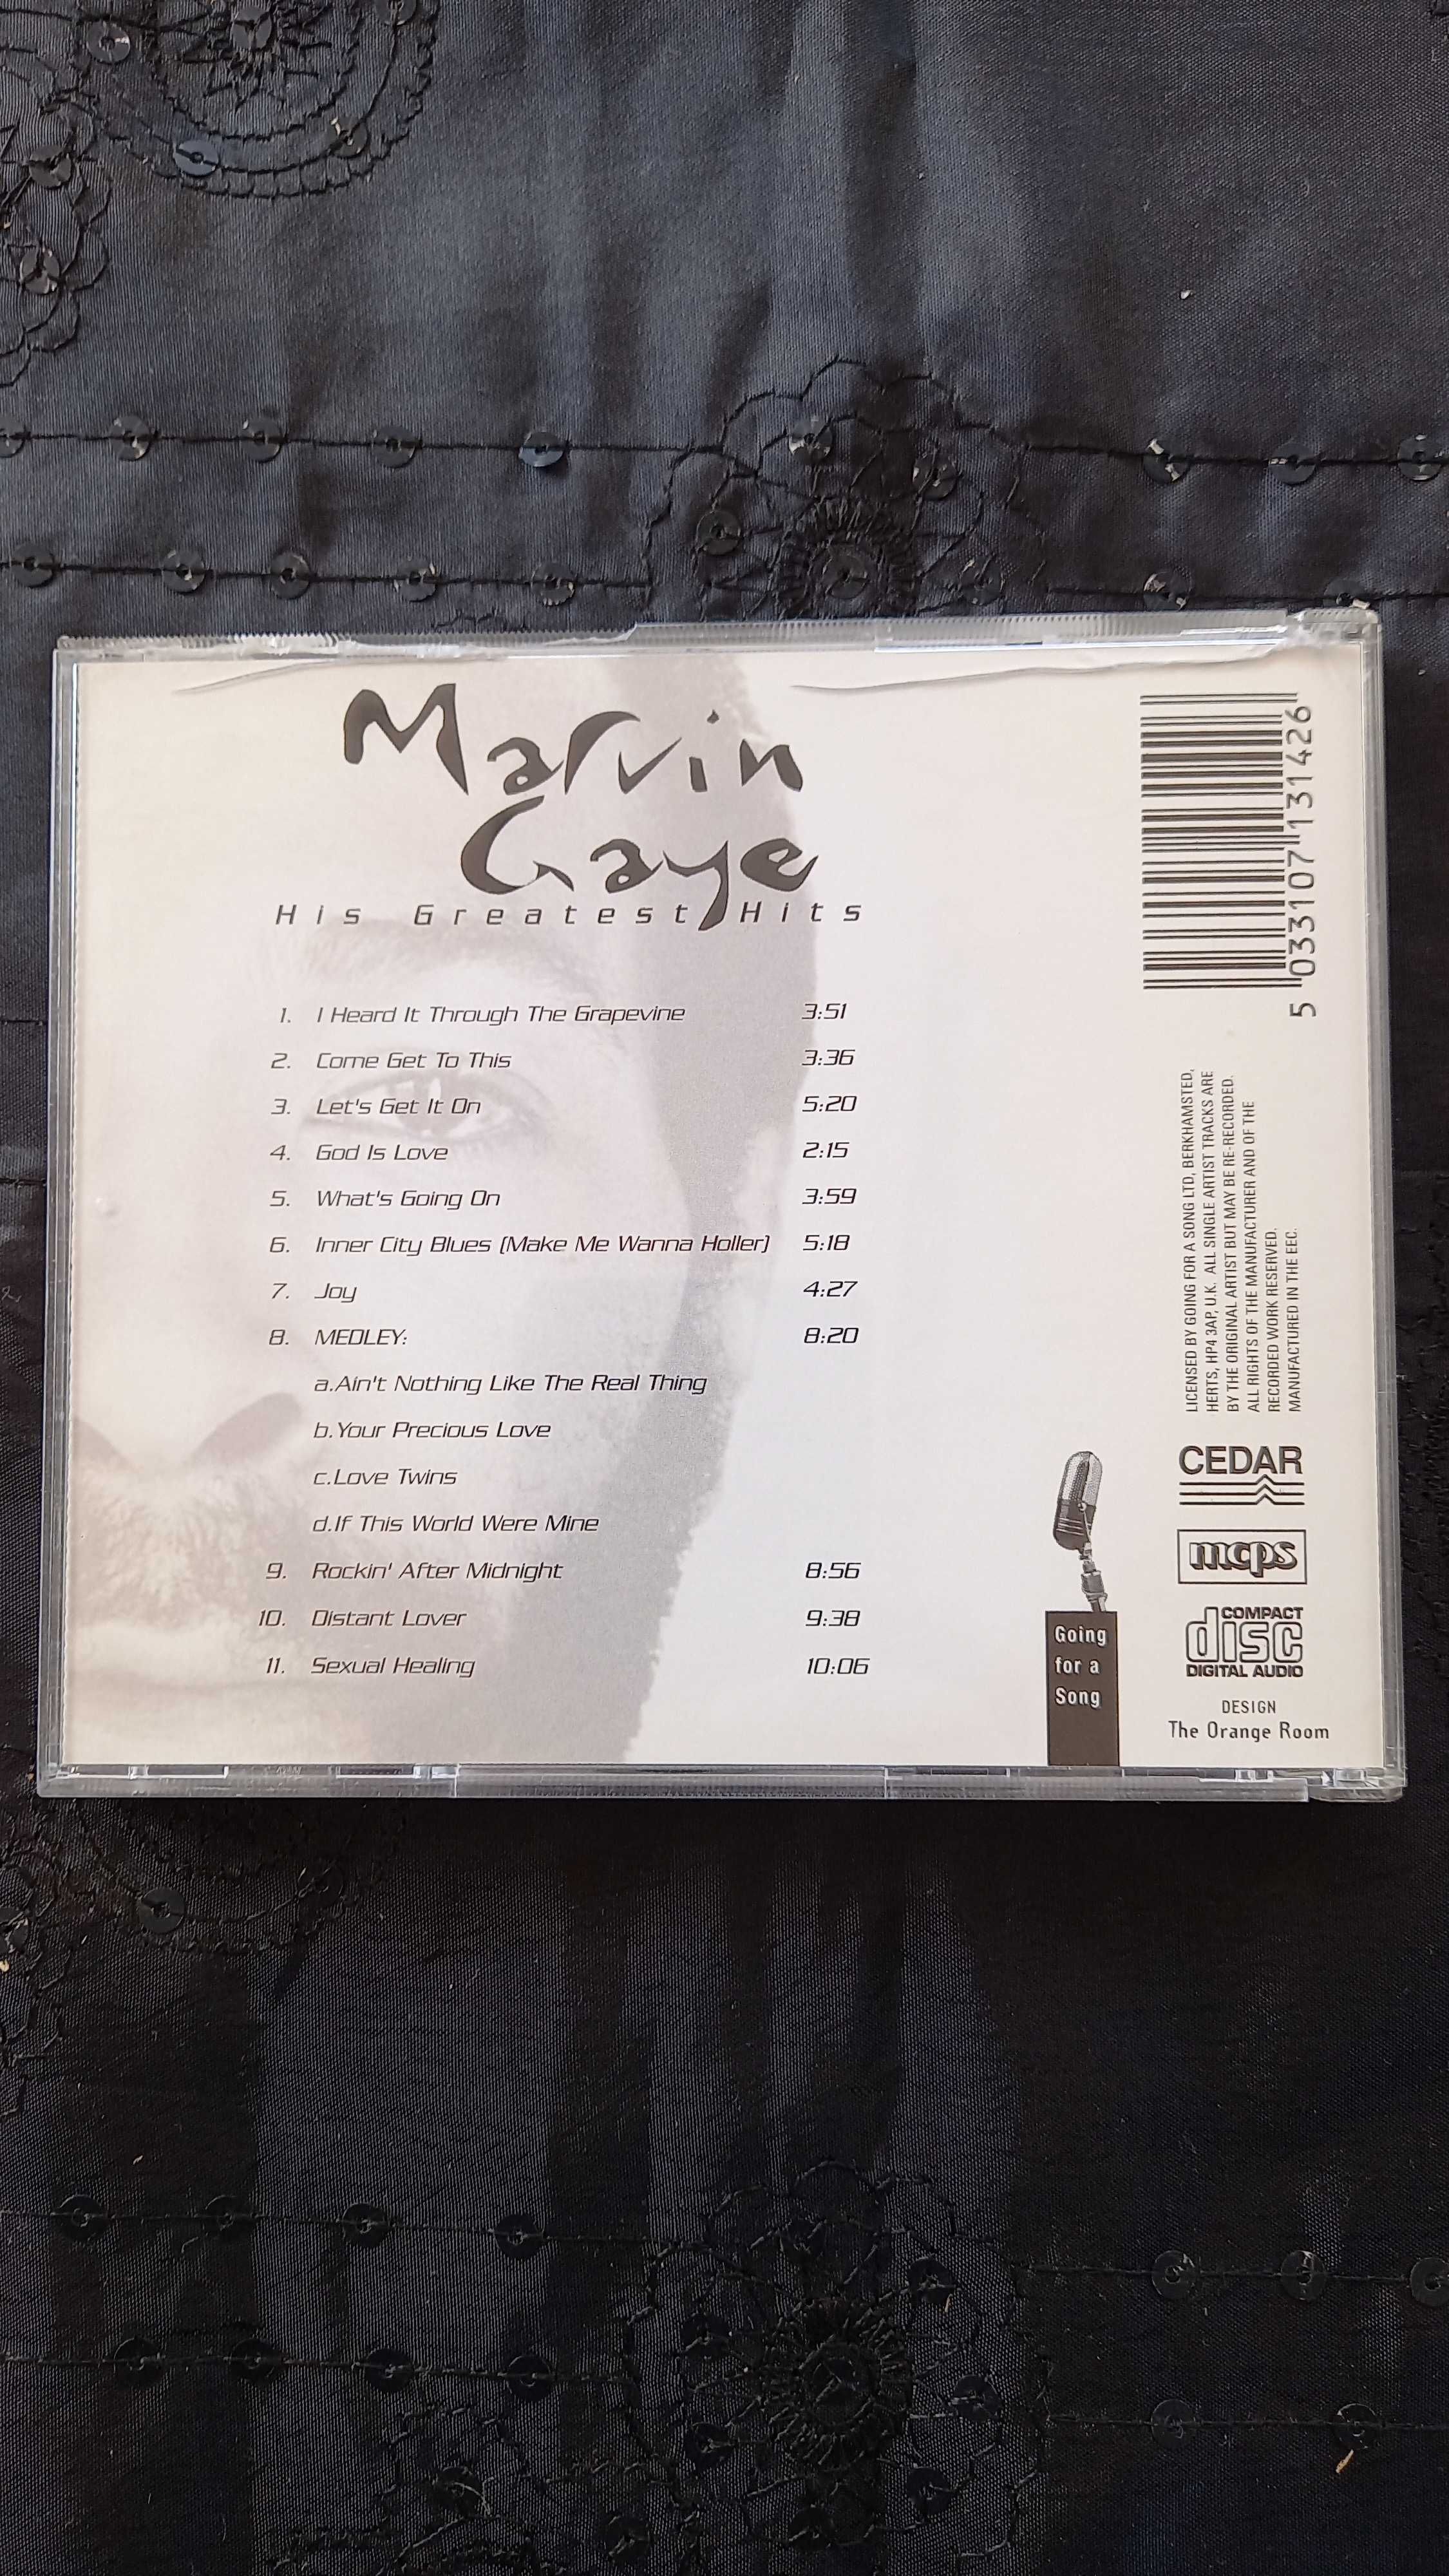 Cd Marvin Gaye - His Greatest Hits